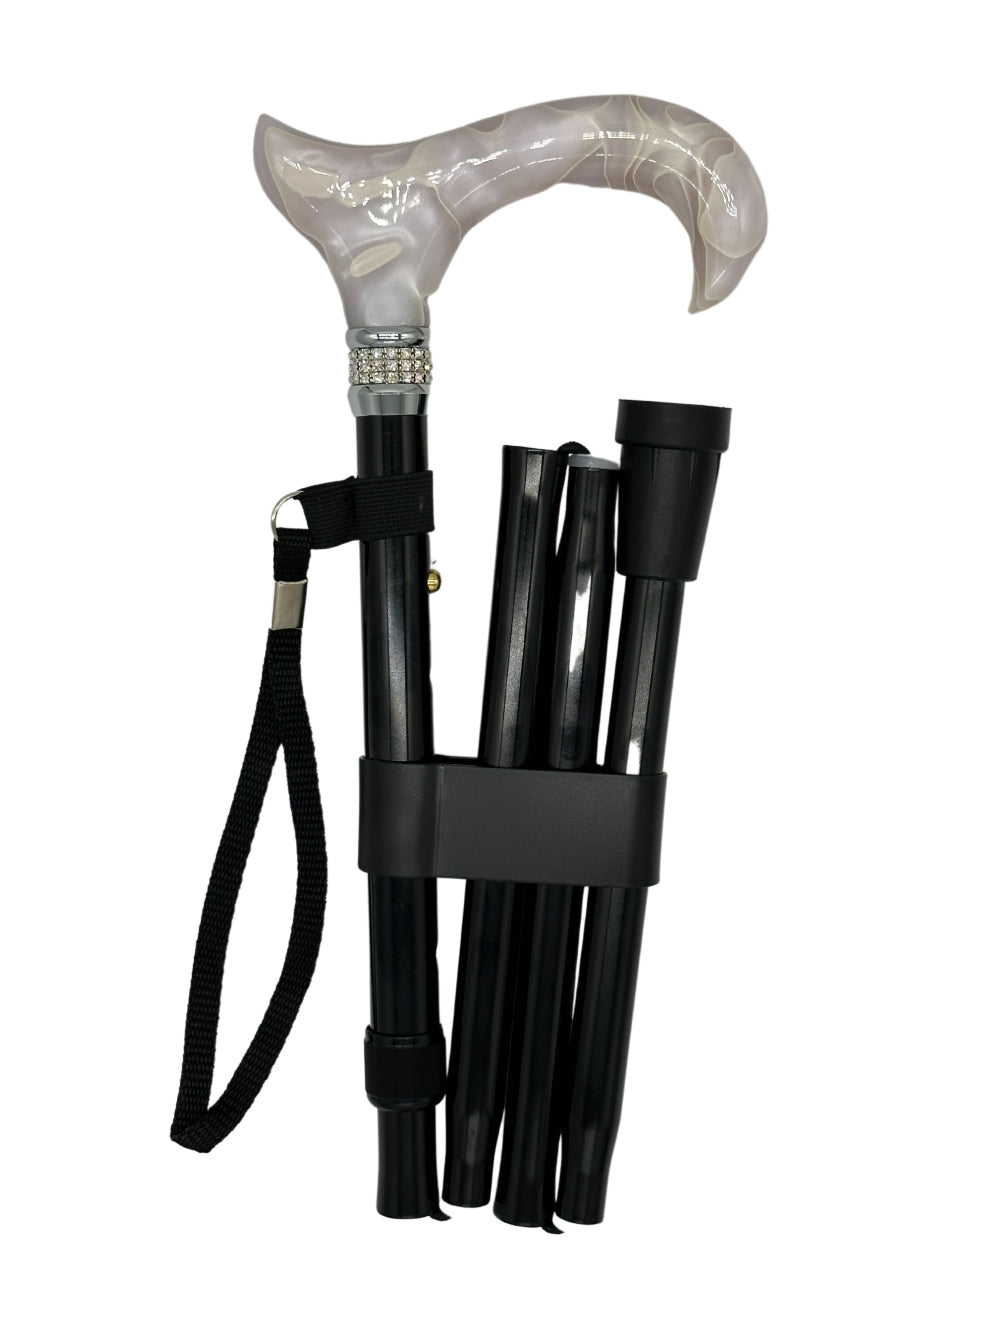 Classy Walking Canes Folding Black and White with Rhinestones